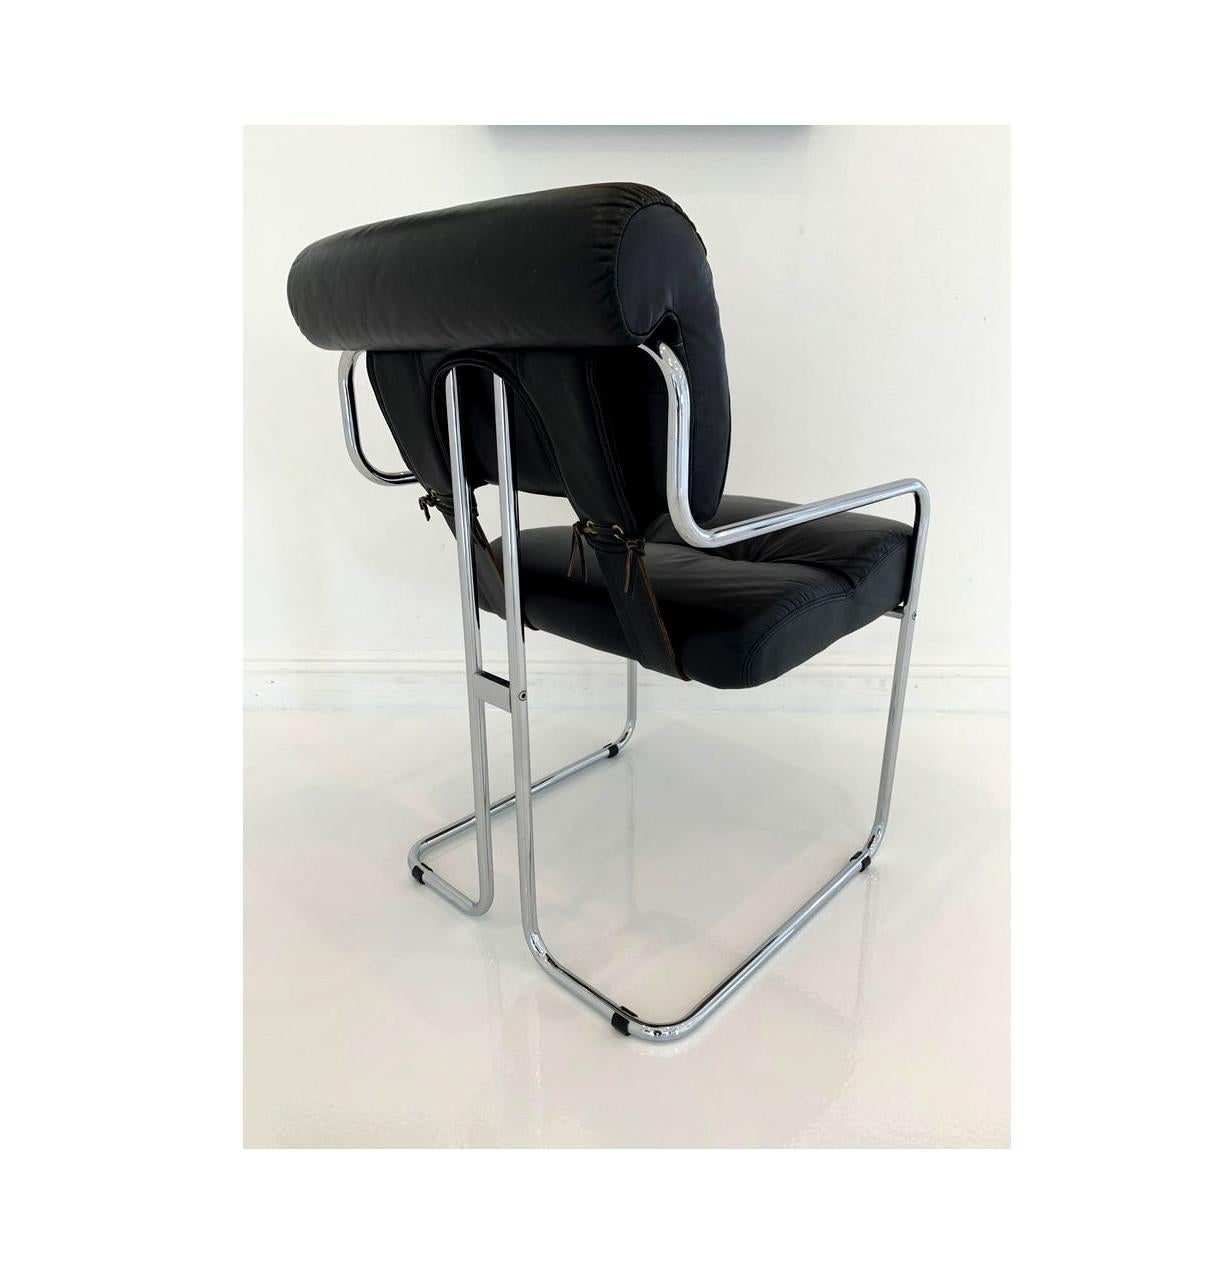 Classic leather chair by Guido Faleschini for Pace. Chrome chair with original black leather. Great condition to chrome and leather. Priced individually. 2 available.